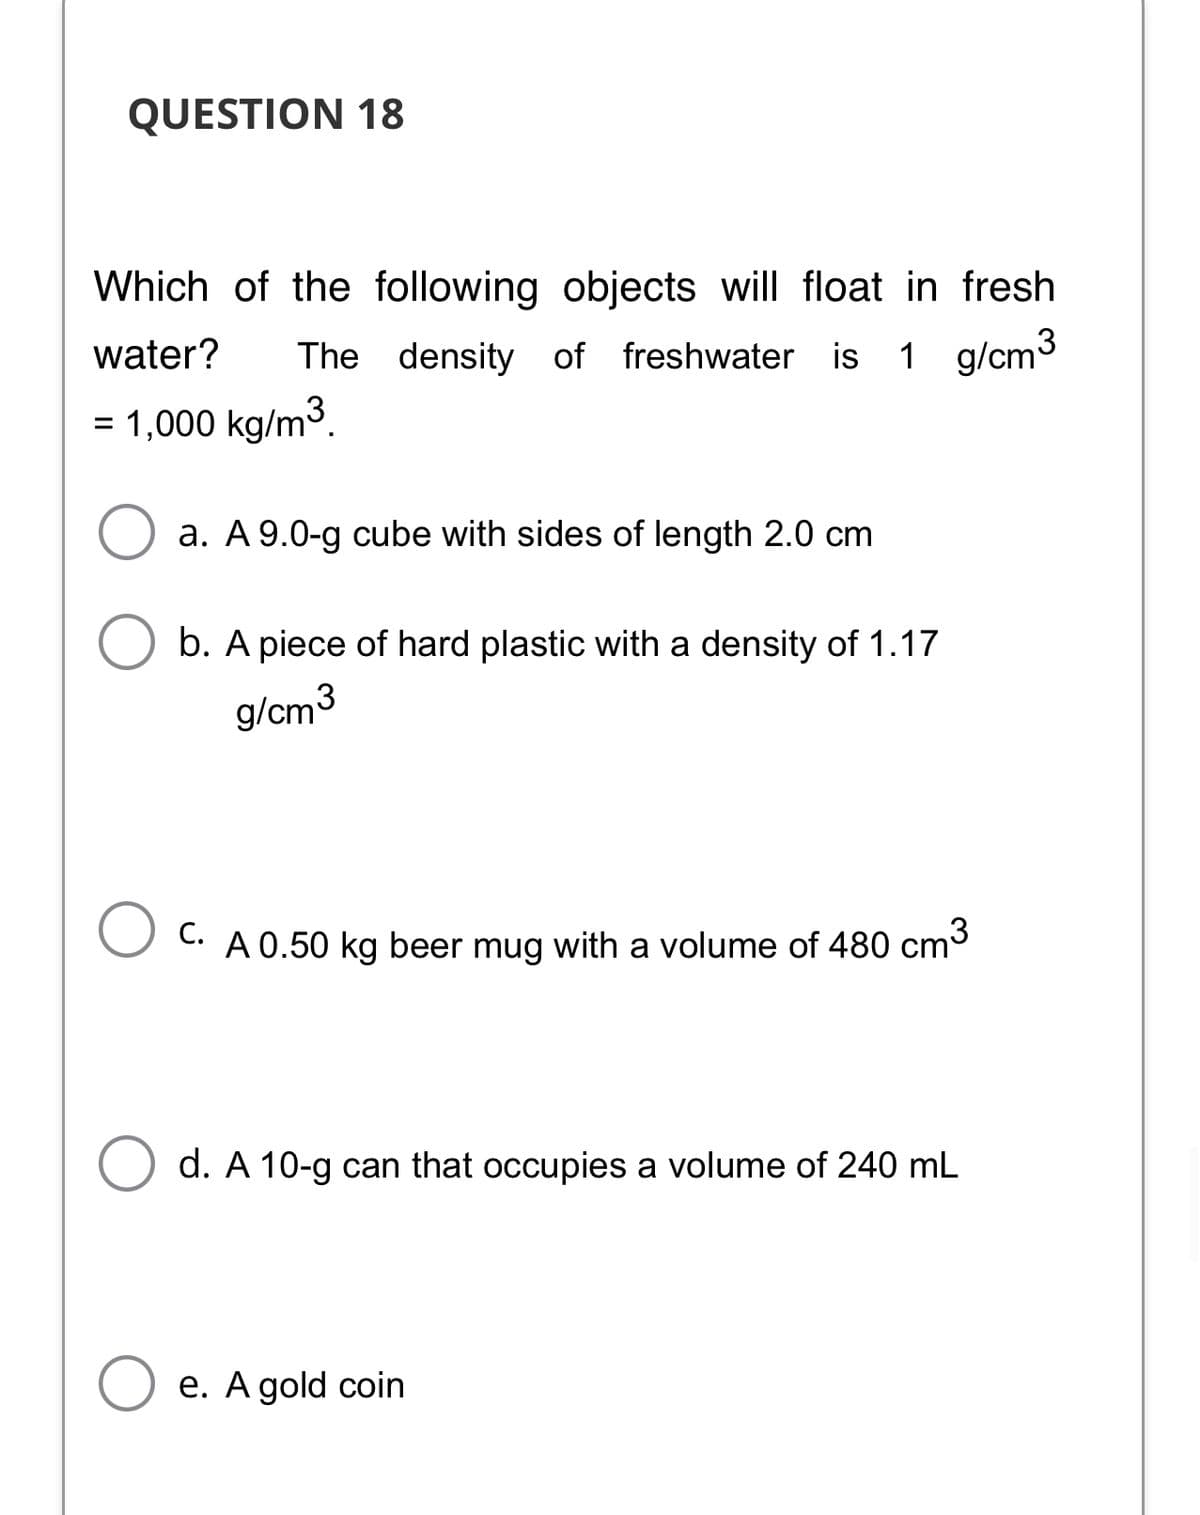 QUESTION 18
Which of the following objects will float in fresh
water?
The density of freshwater is
1 g/cm3
= 1,000 kg/m3.
a. A 9.0-g cube with sides of length 2.0 cm
b. A piece of hard plastic with a density of 1.17
g/cm3
C. A 0.50 kg beer mug with a volume of 480 cm3
d. A 10-g can that occupies a volume of 240 mL
O e. A gold coin
